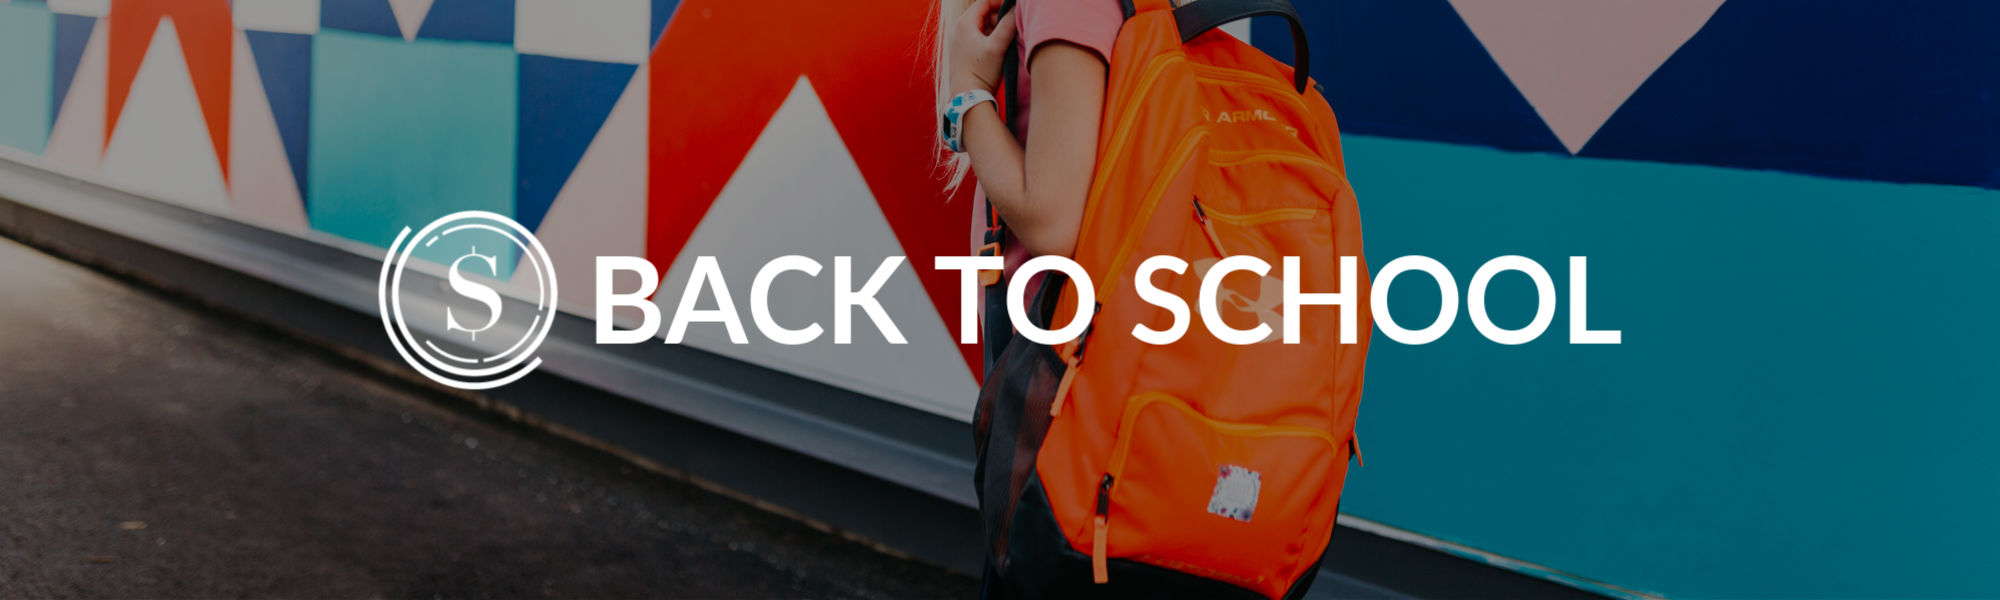 under armour back to school sale